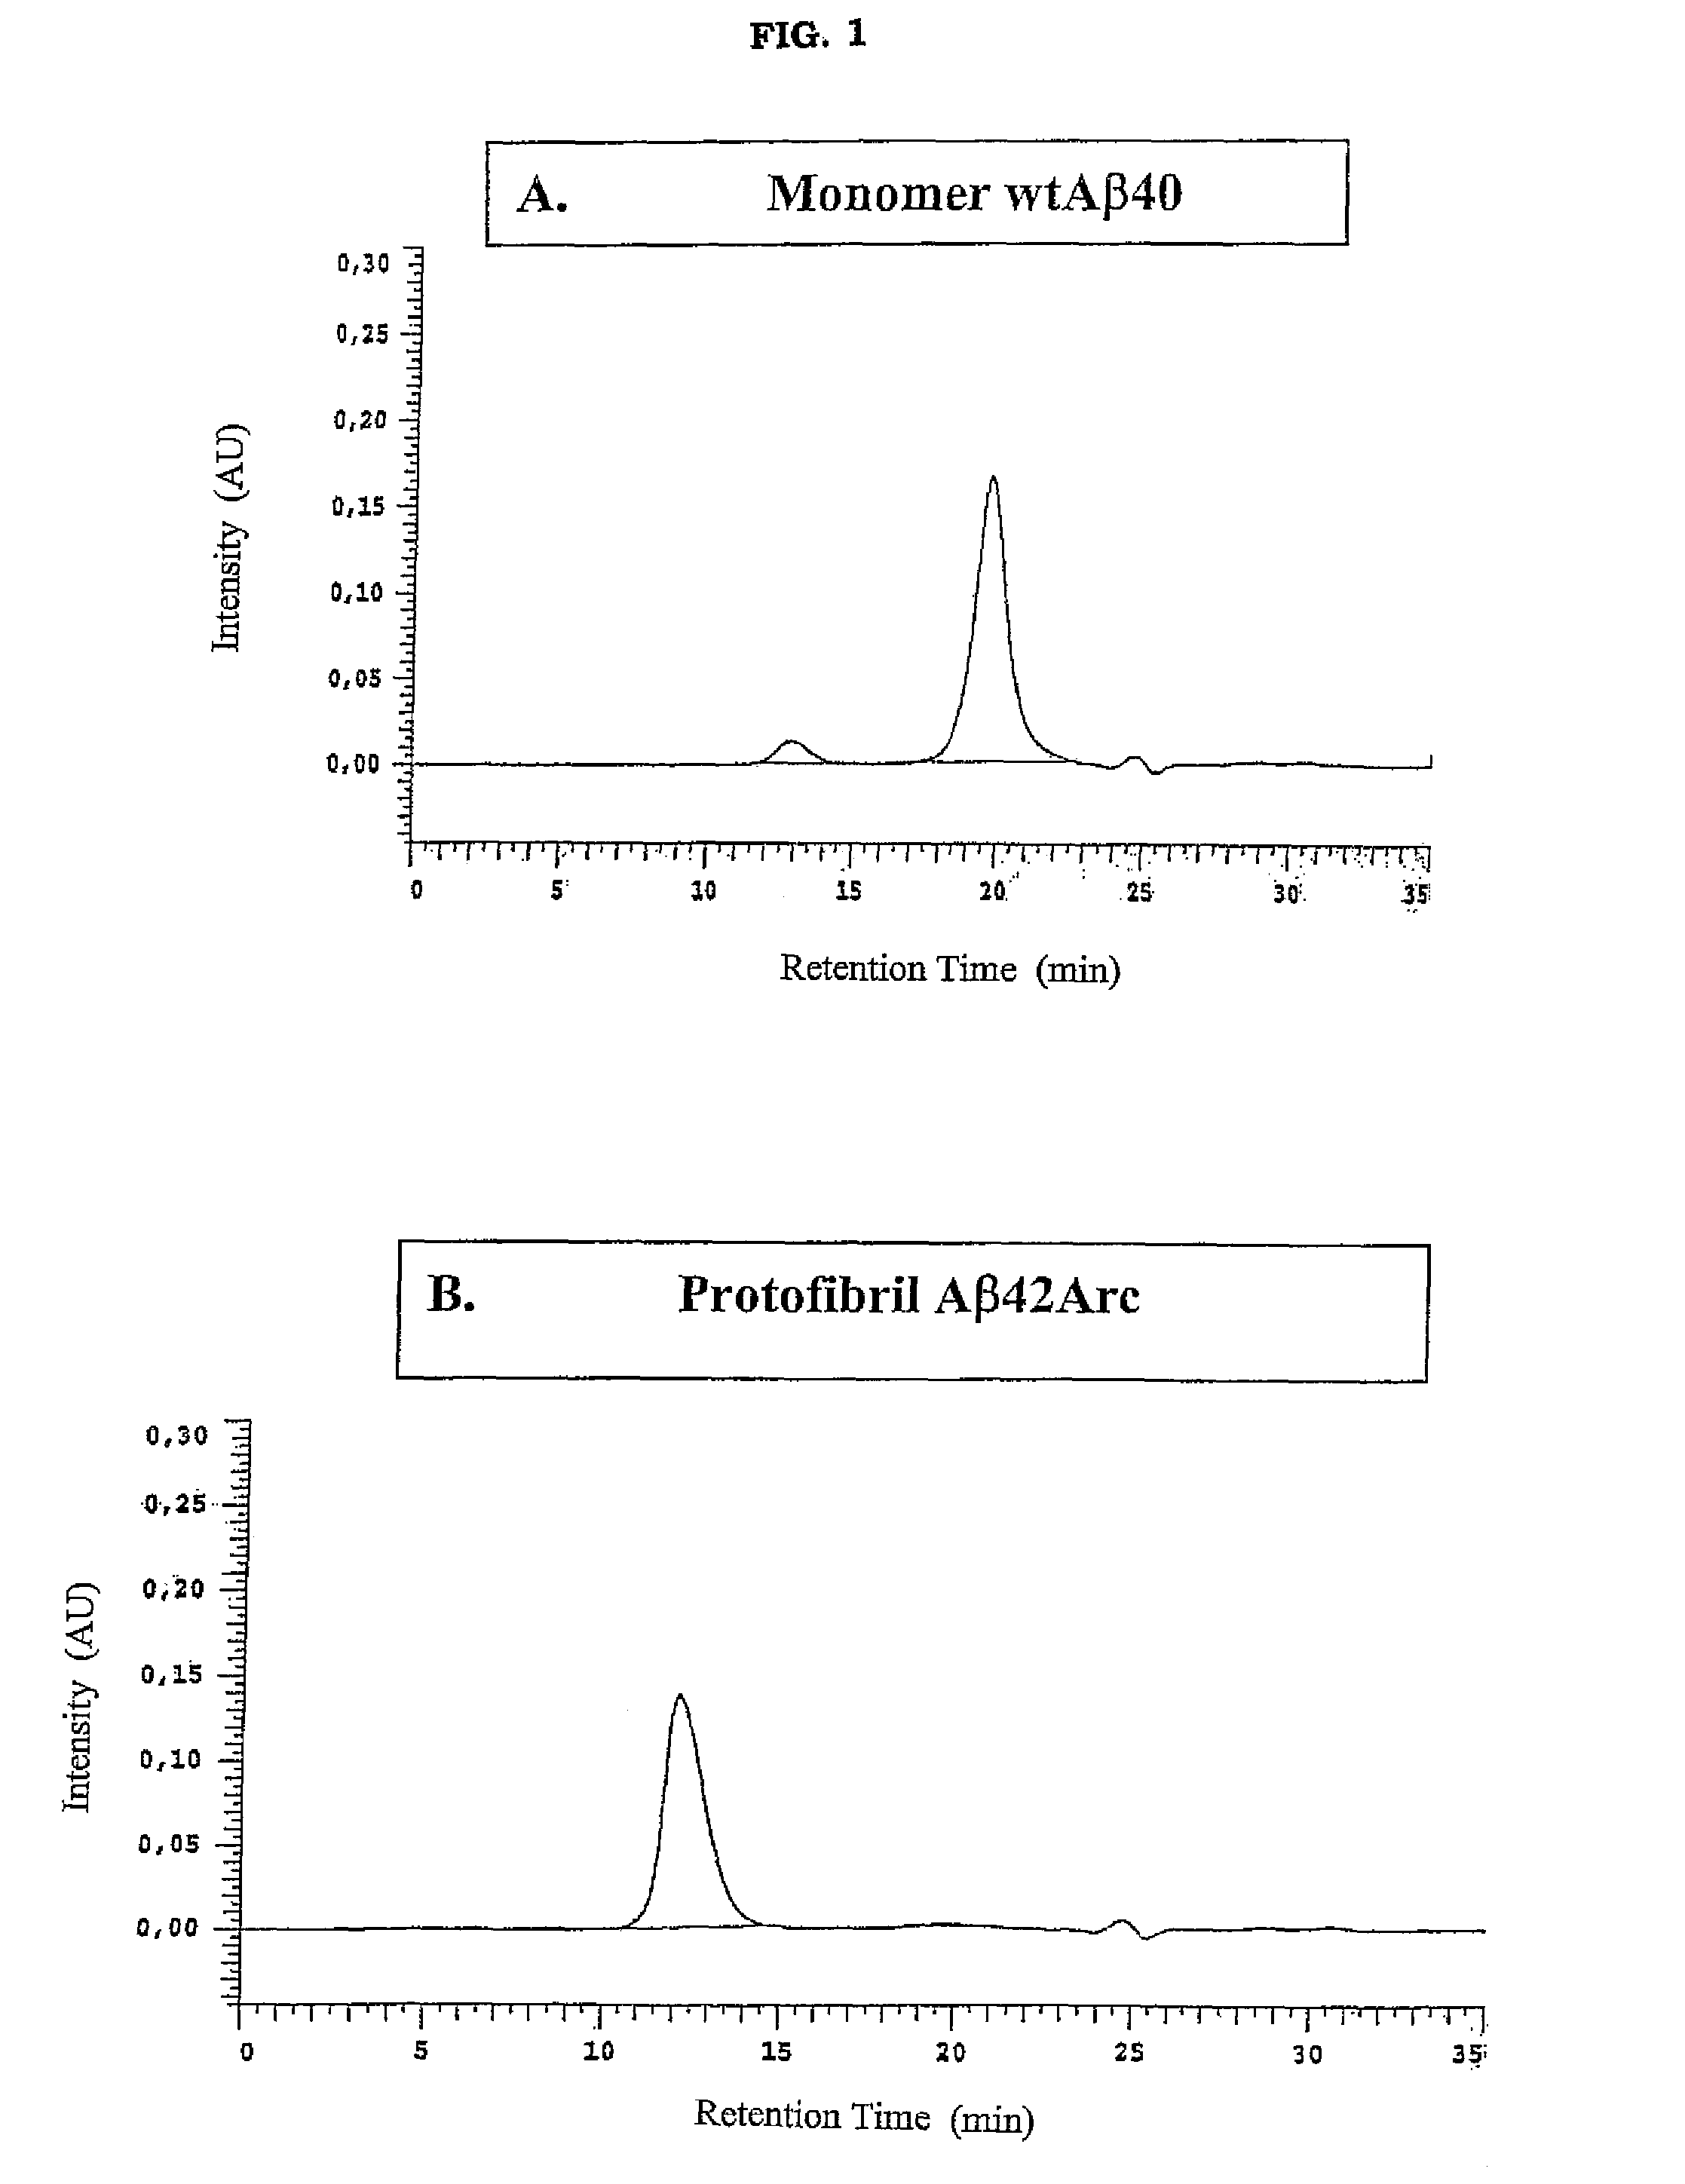 Antibodies specific for soluble amyloid beta peptide protofibrils and uses thereof